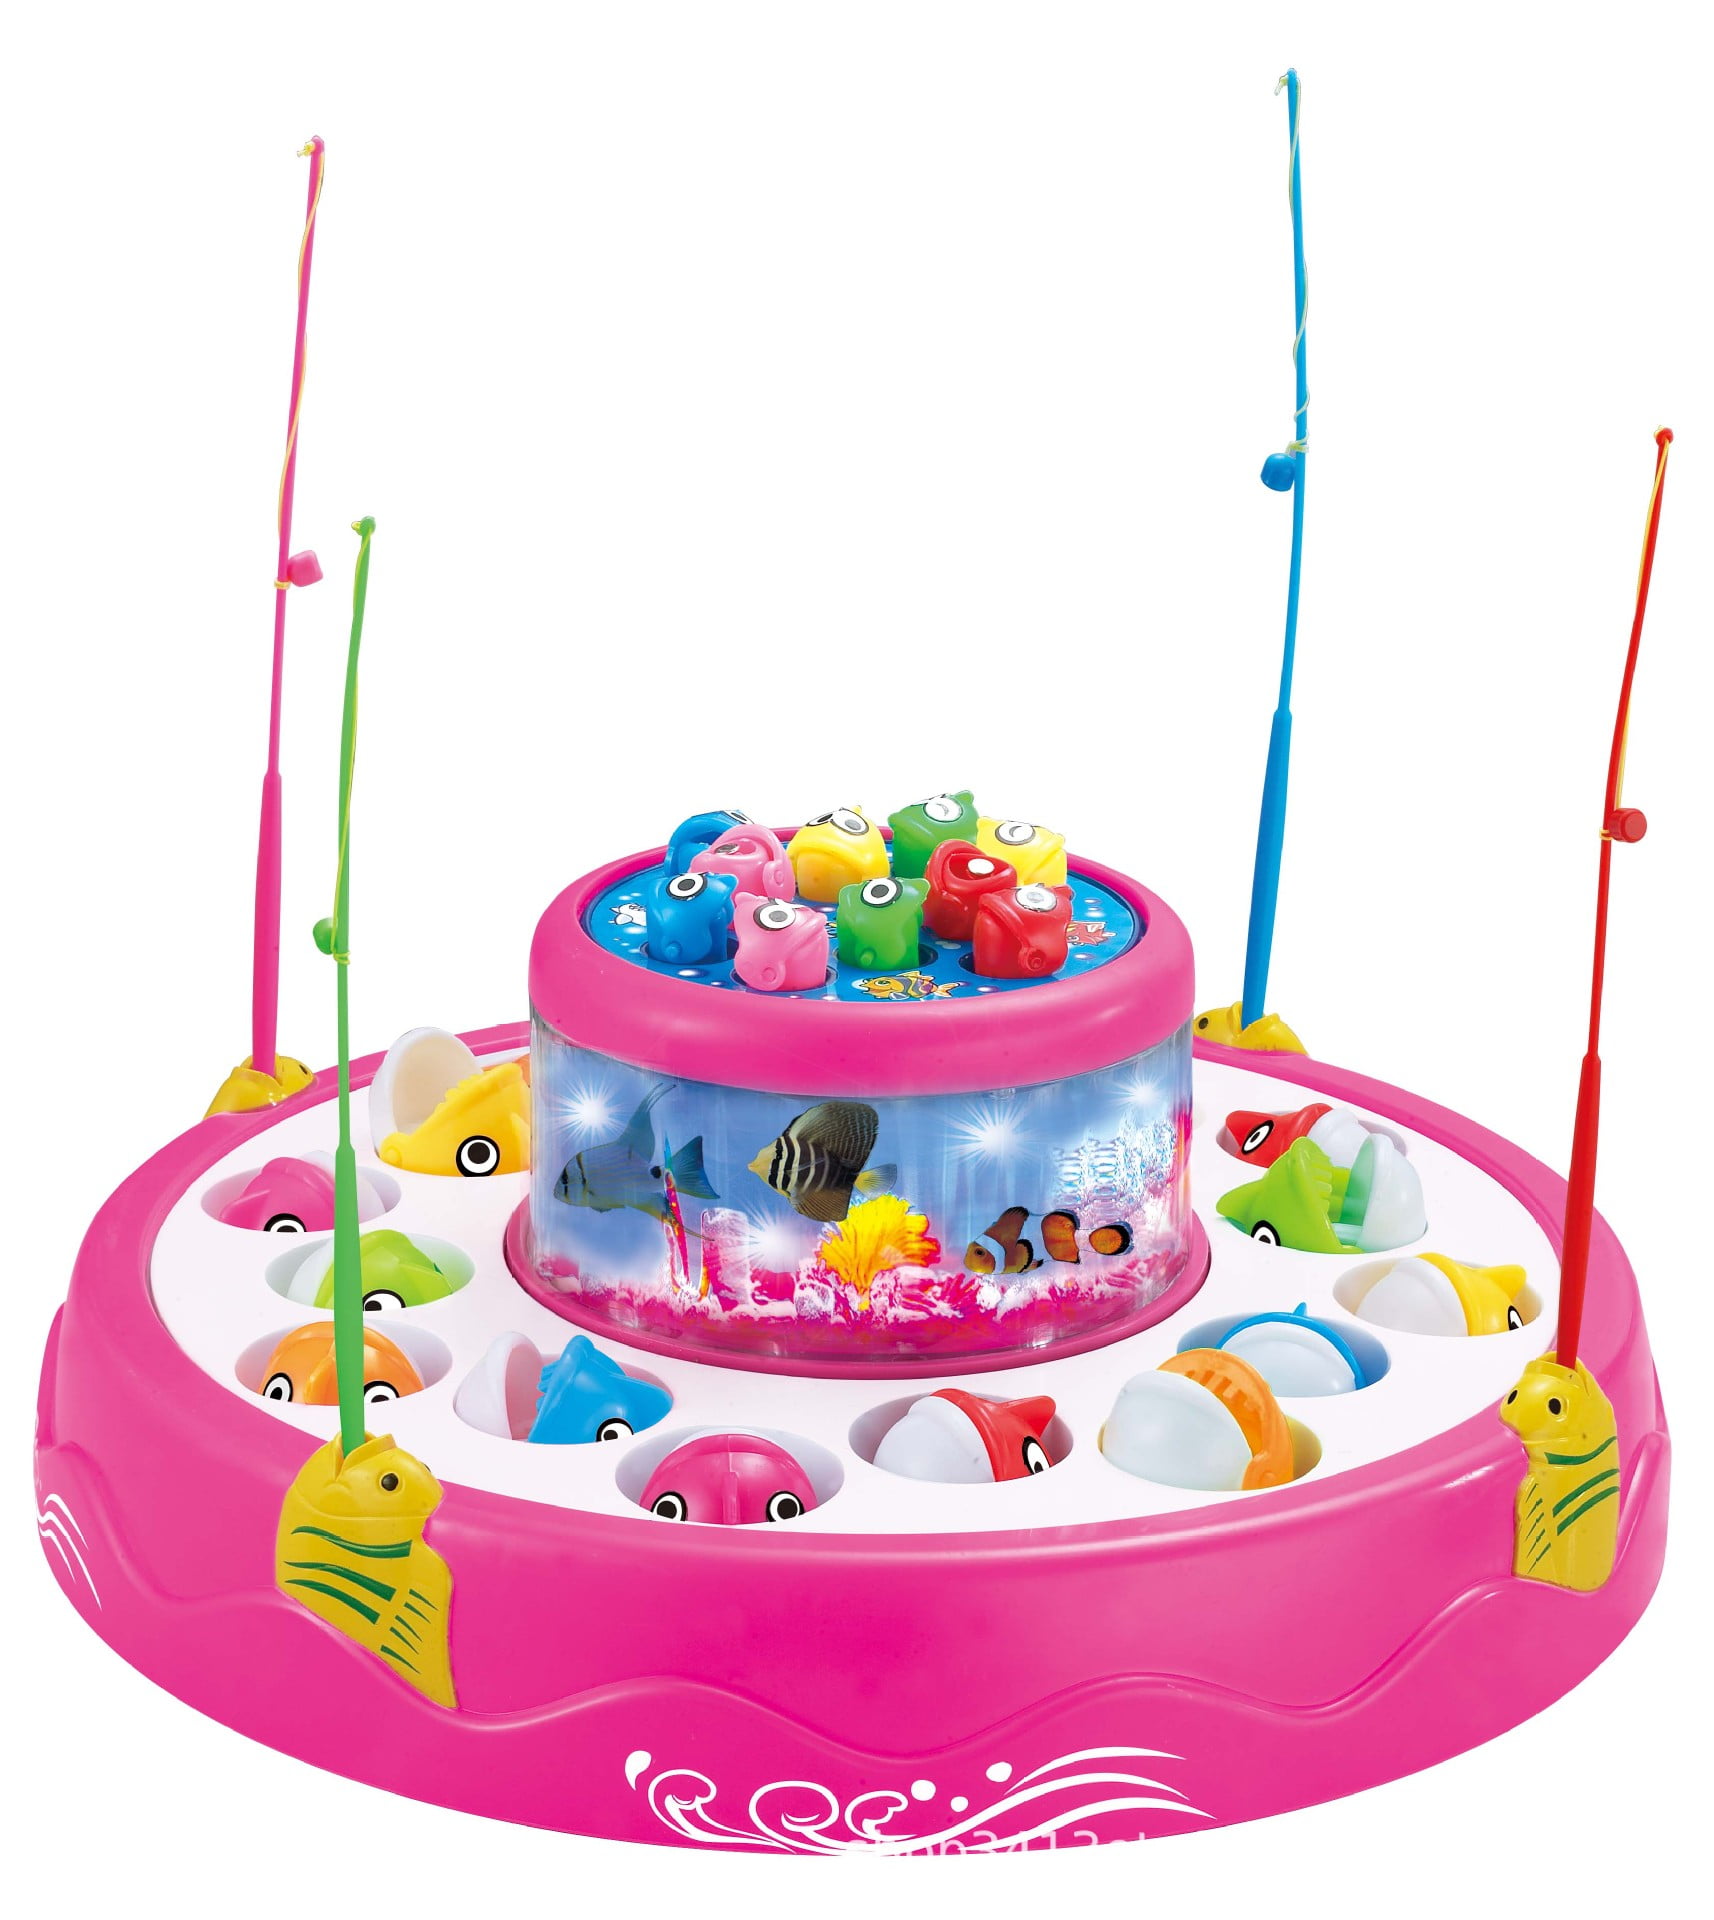 Magnetic Board Fishing Game Toy, Fashionable 2 Layer 4 Poles Light